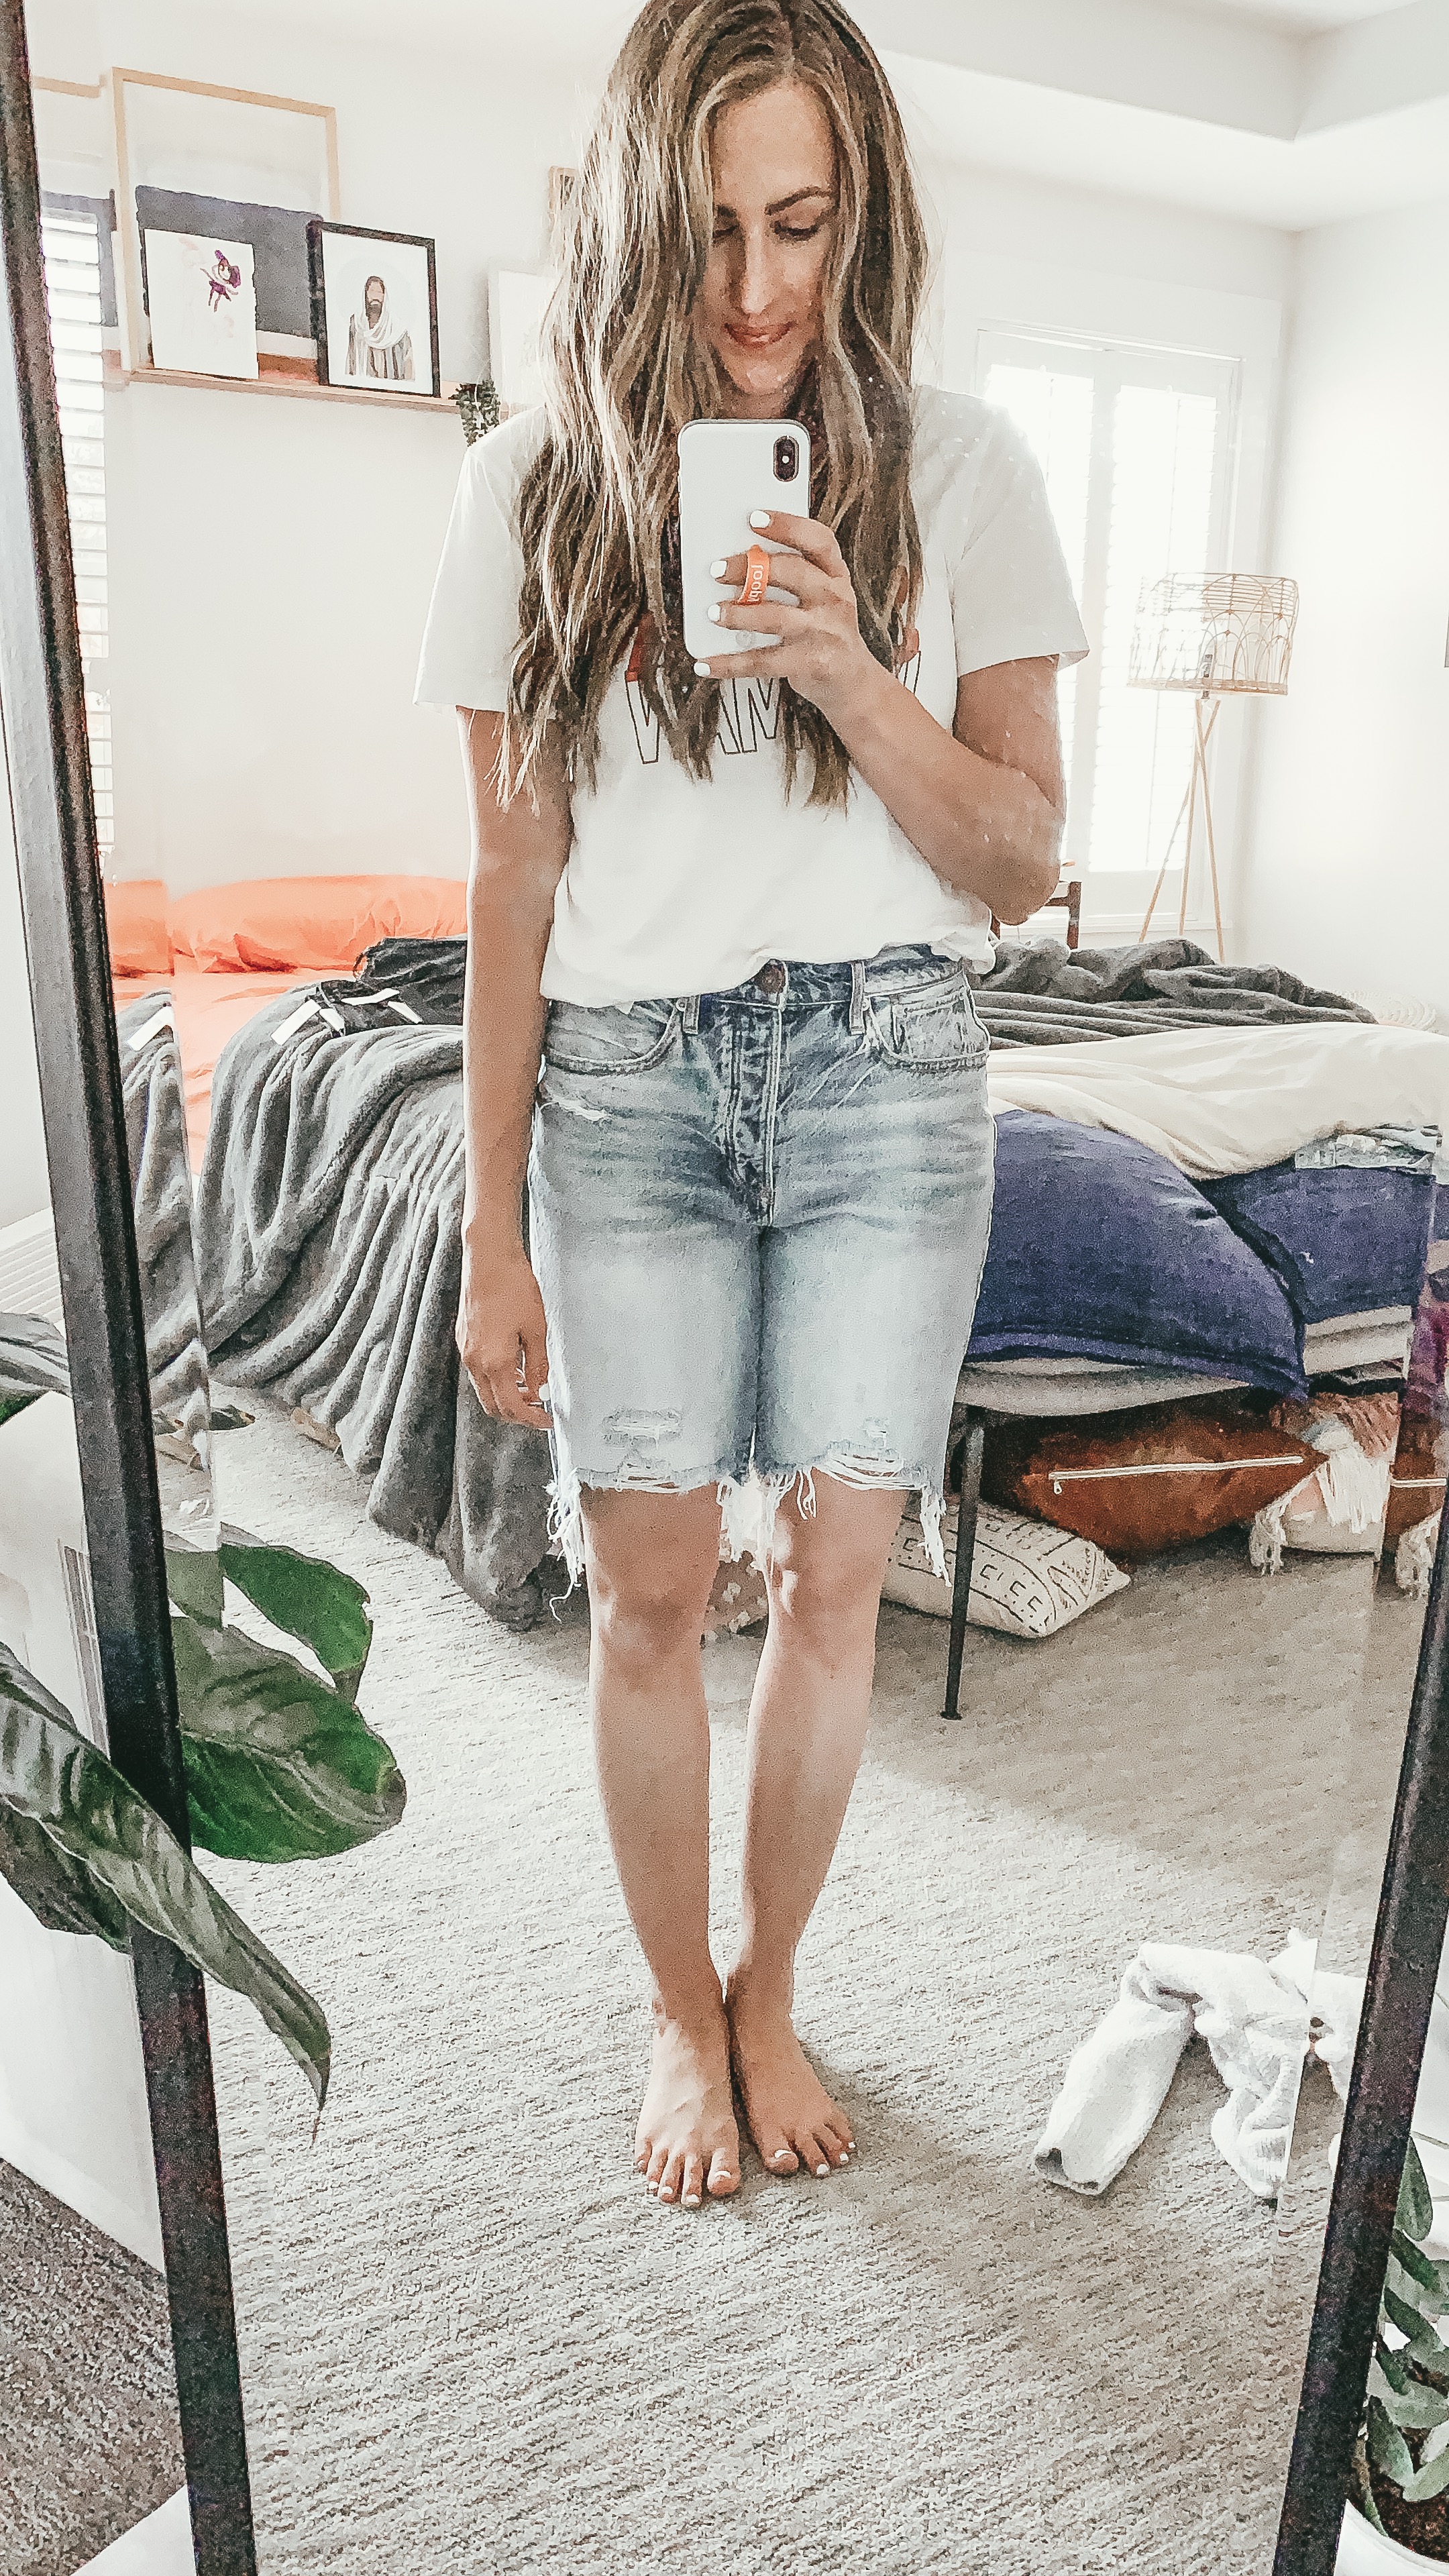 Looking for the perfect pair of bermuda shorts? Utah Style Blogger Dani Marie is sharing her favorite bermuda shorts and how to style them effortlessly.  Click to see them here!